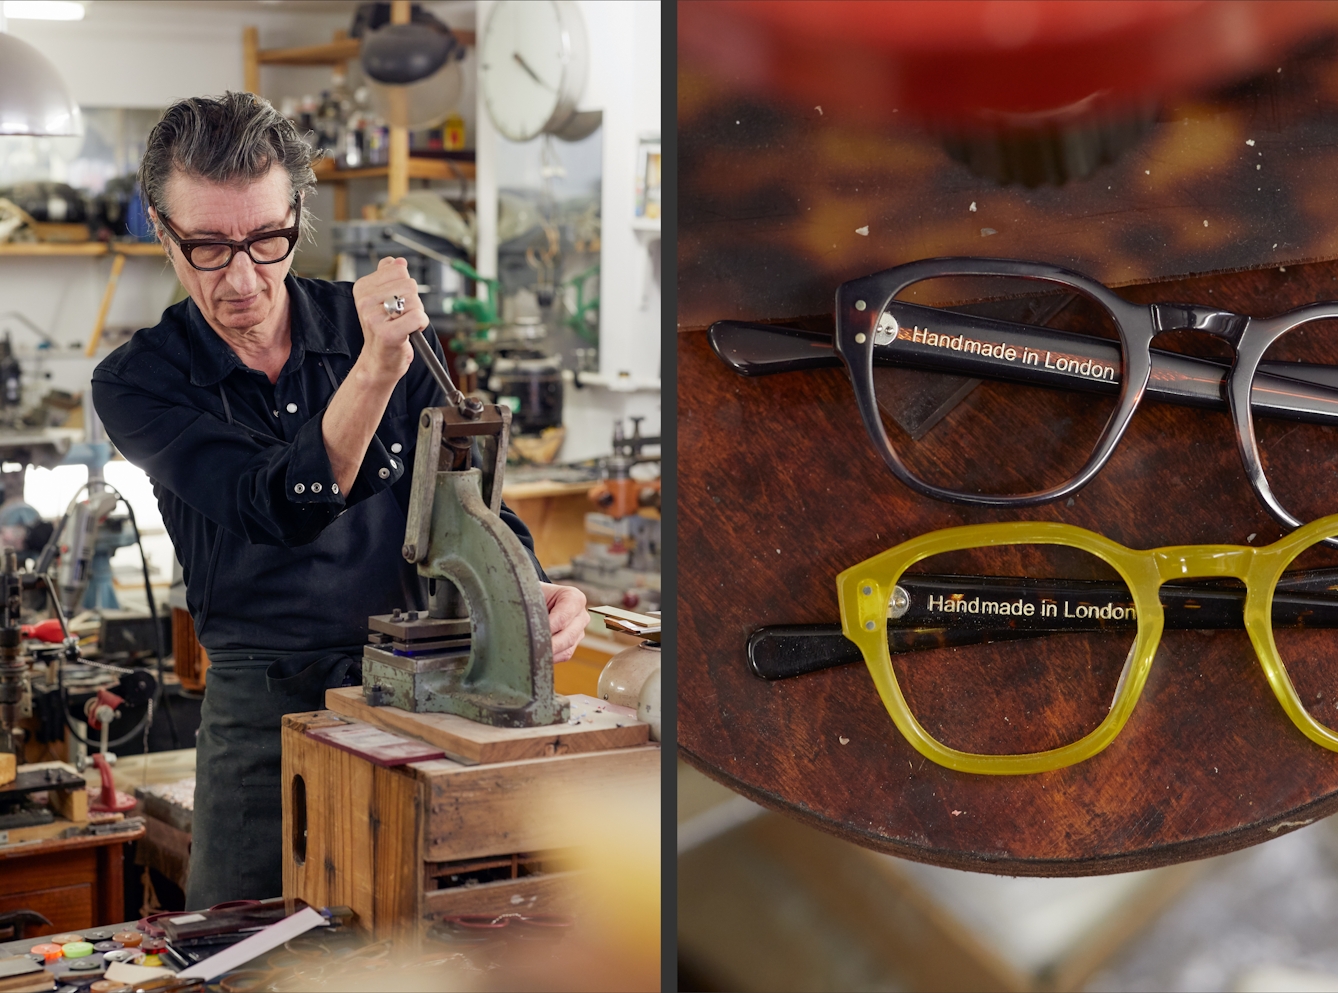 Photographic diptych. The image on the left shows a man in a black shirt and apron operating a desk mounted machine press. The image on the right shows a close up view of 2 finished spectacle frames, one brown, one yellow. On the arm of each frame are the words, "Handmade in London".